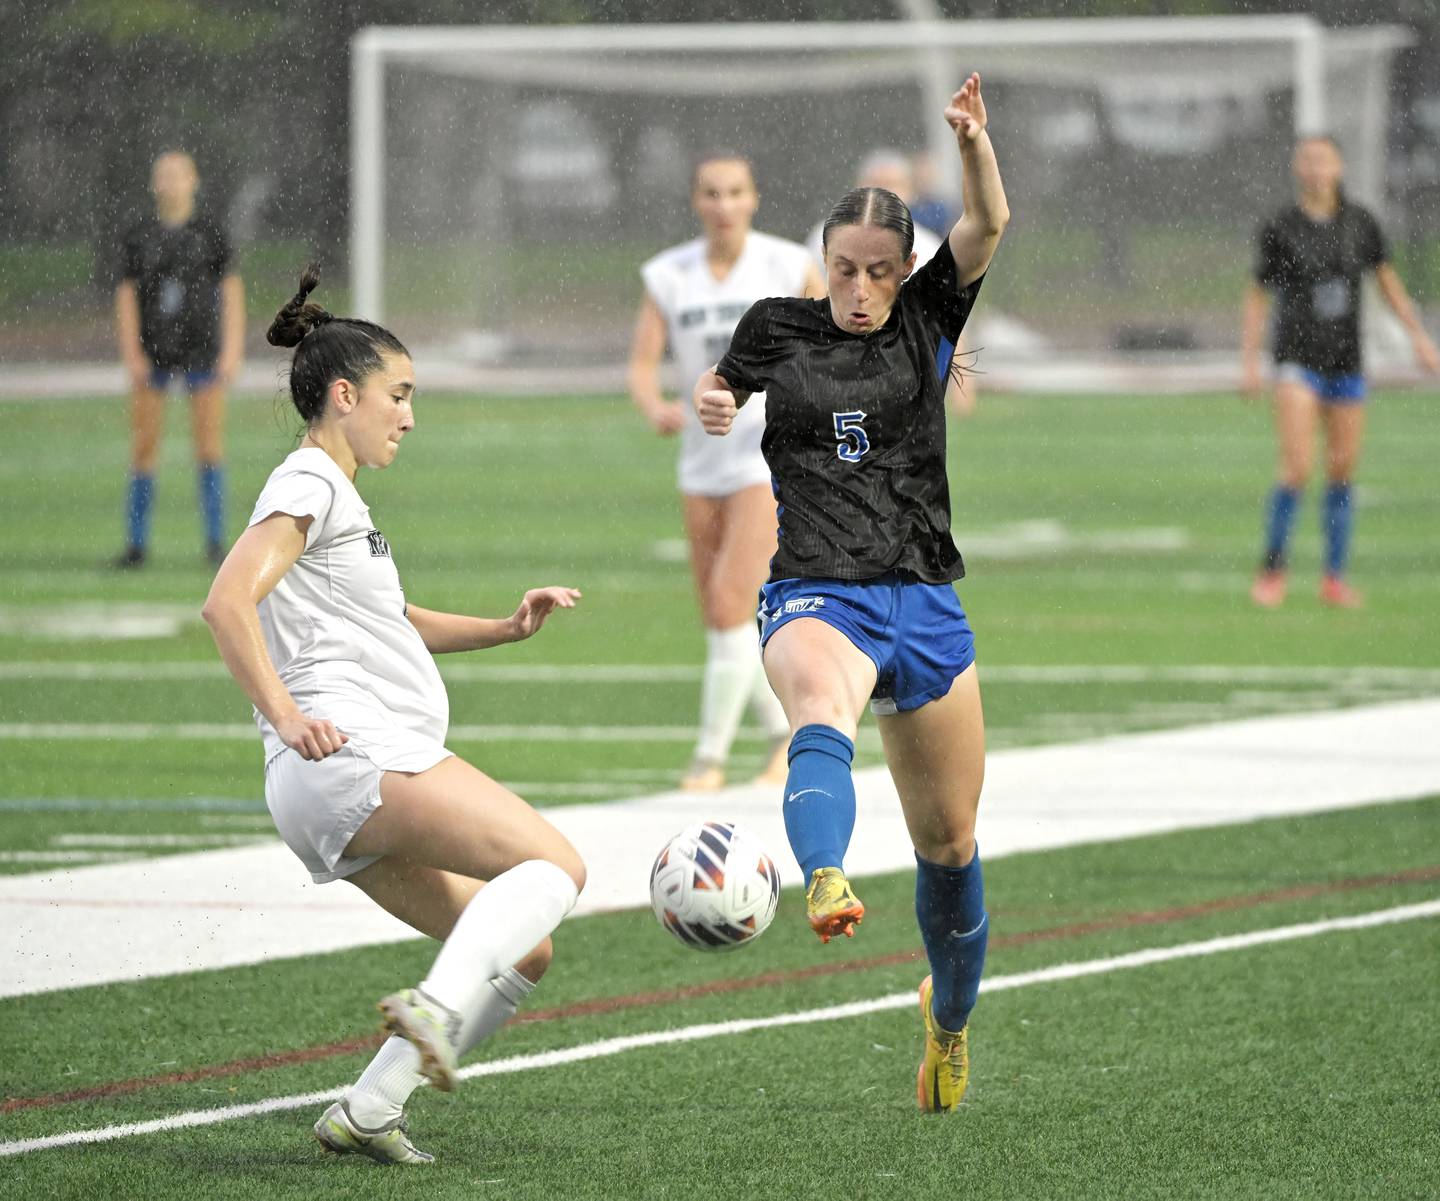 St. Charles North High School’s Rian Spaulding stretches for the ball against Winnetka New Trier High School’s Kennedy Colegrove in the IHSA Class 3A championship game at North Central College in Naperville on Saturday, June 1, 2024.